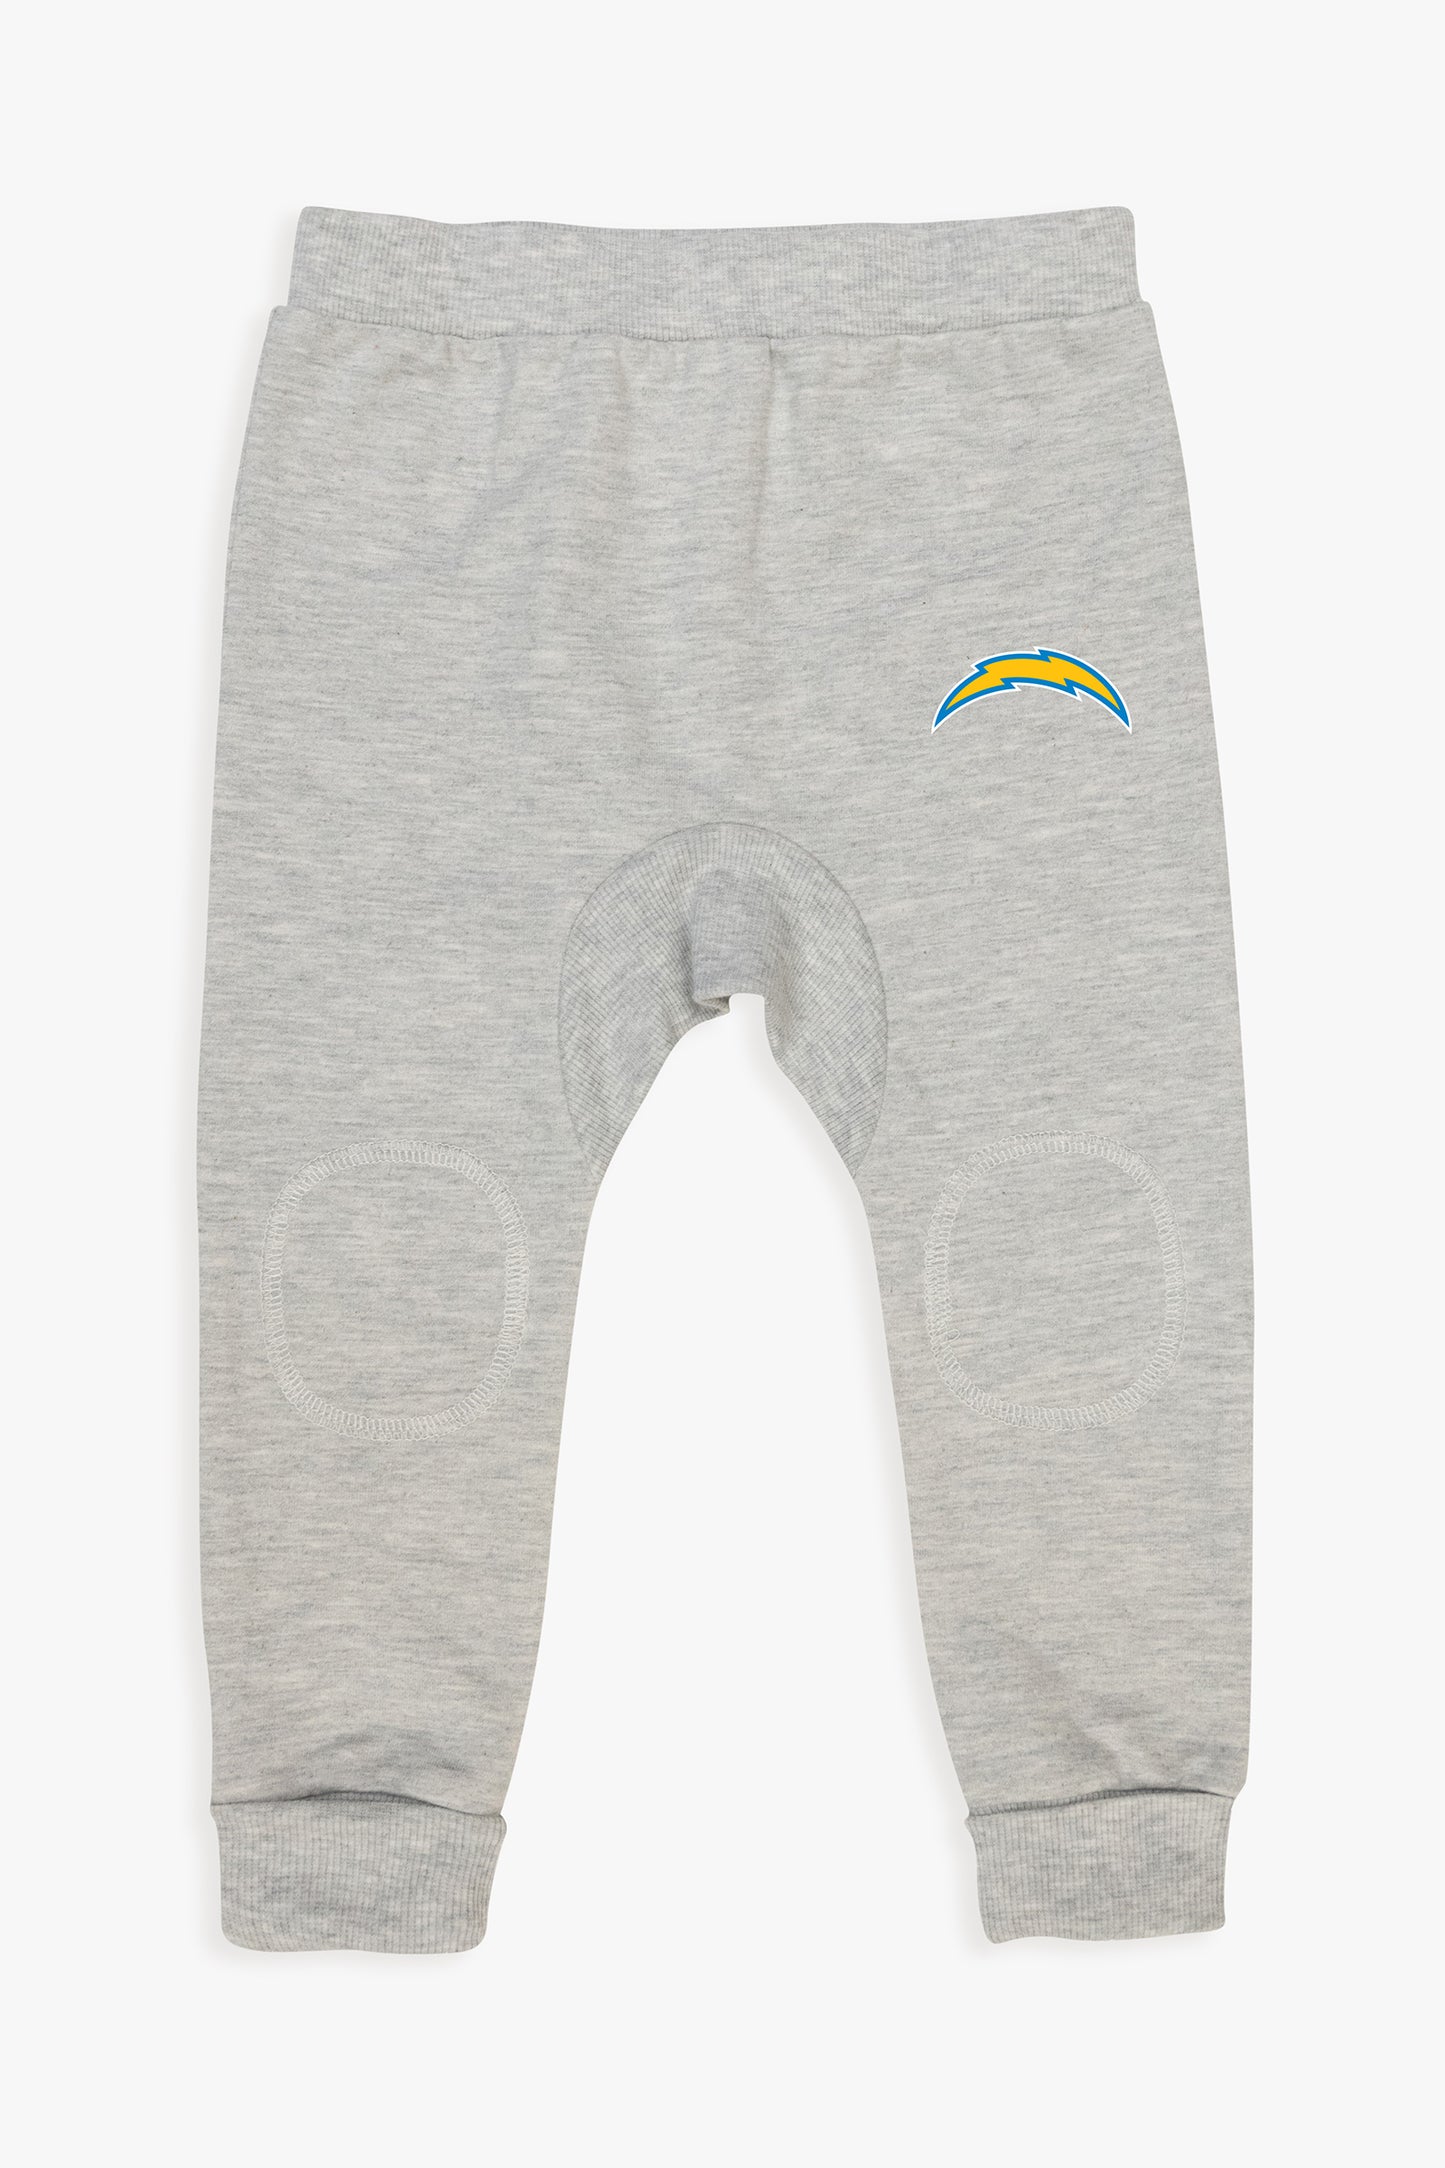 Gertex NFL Toddler Grey French Terry Pants